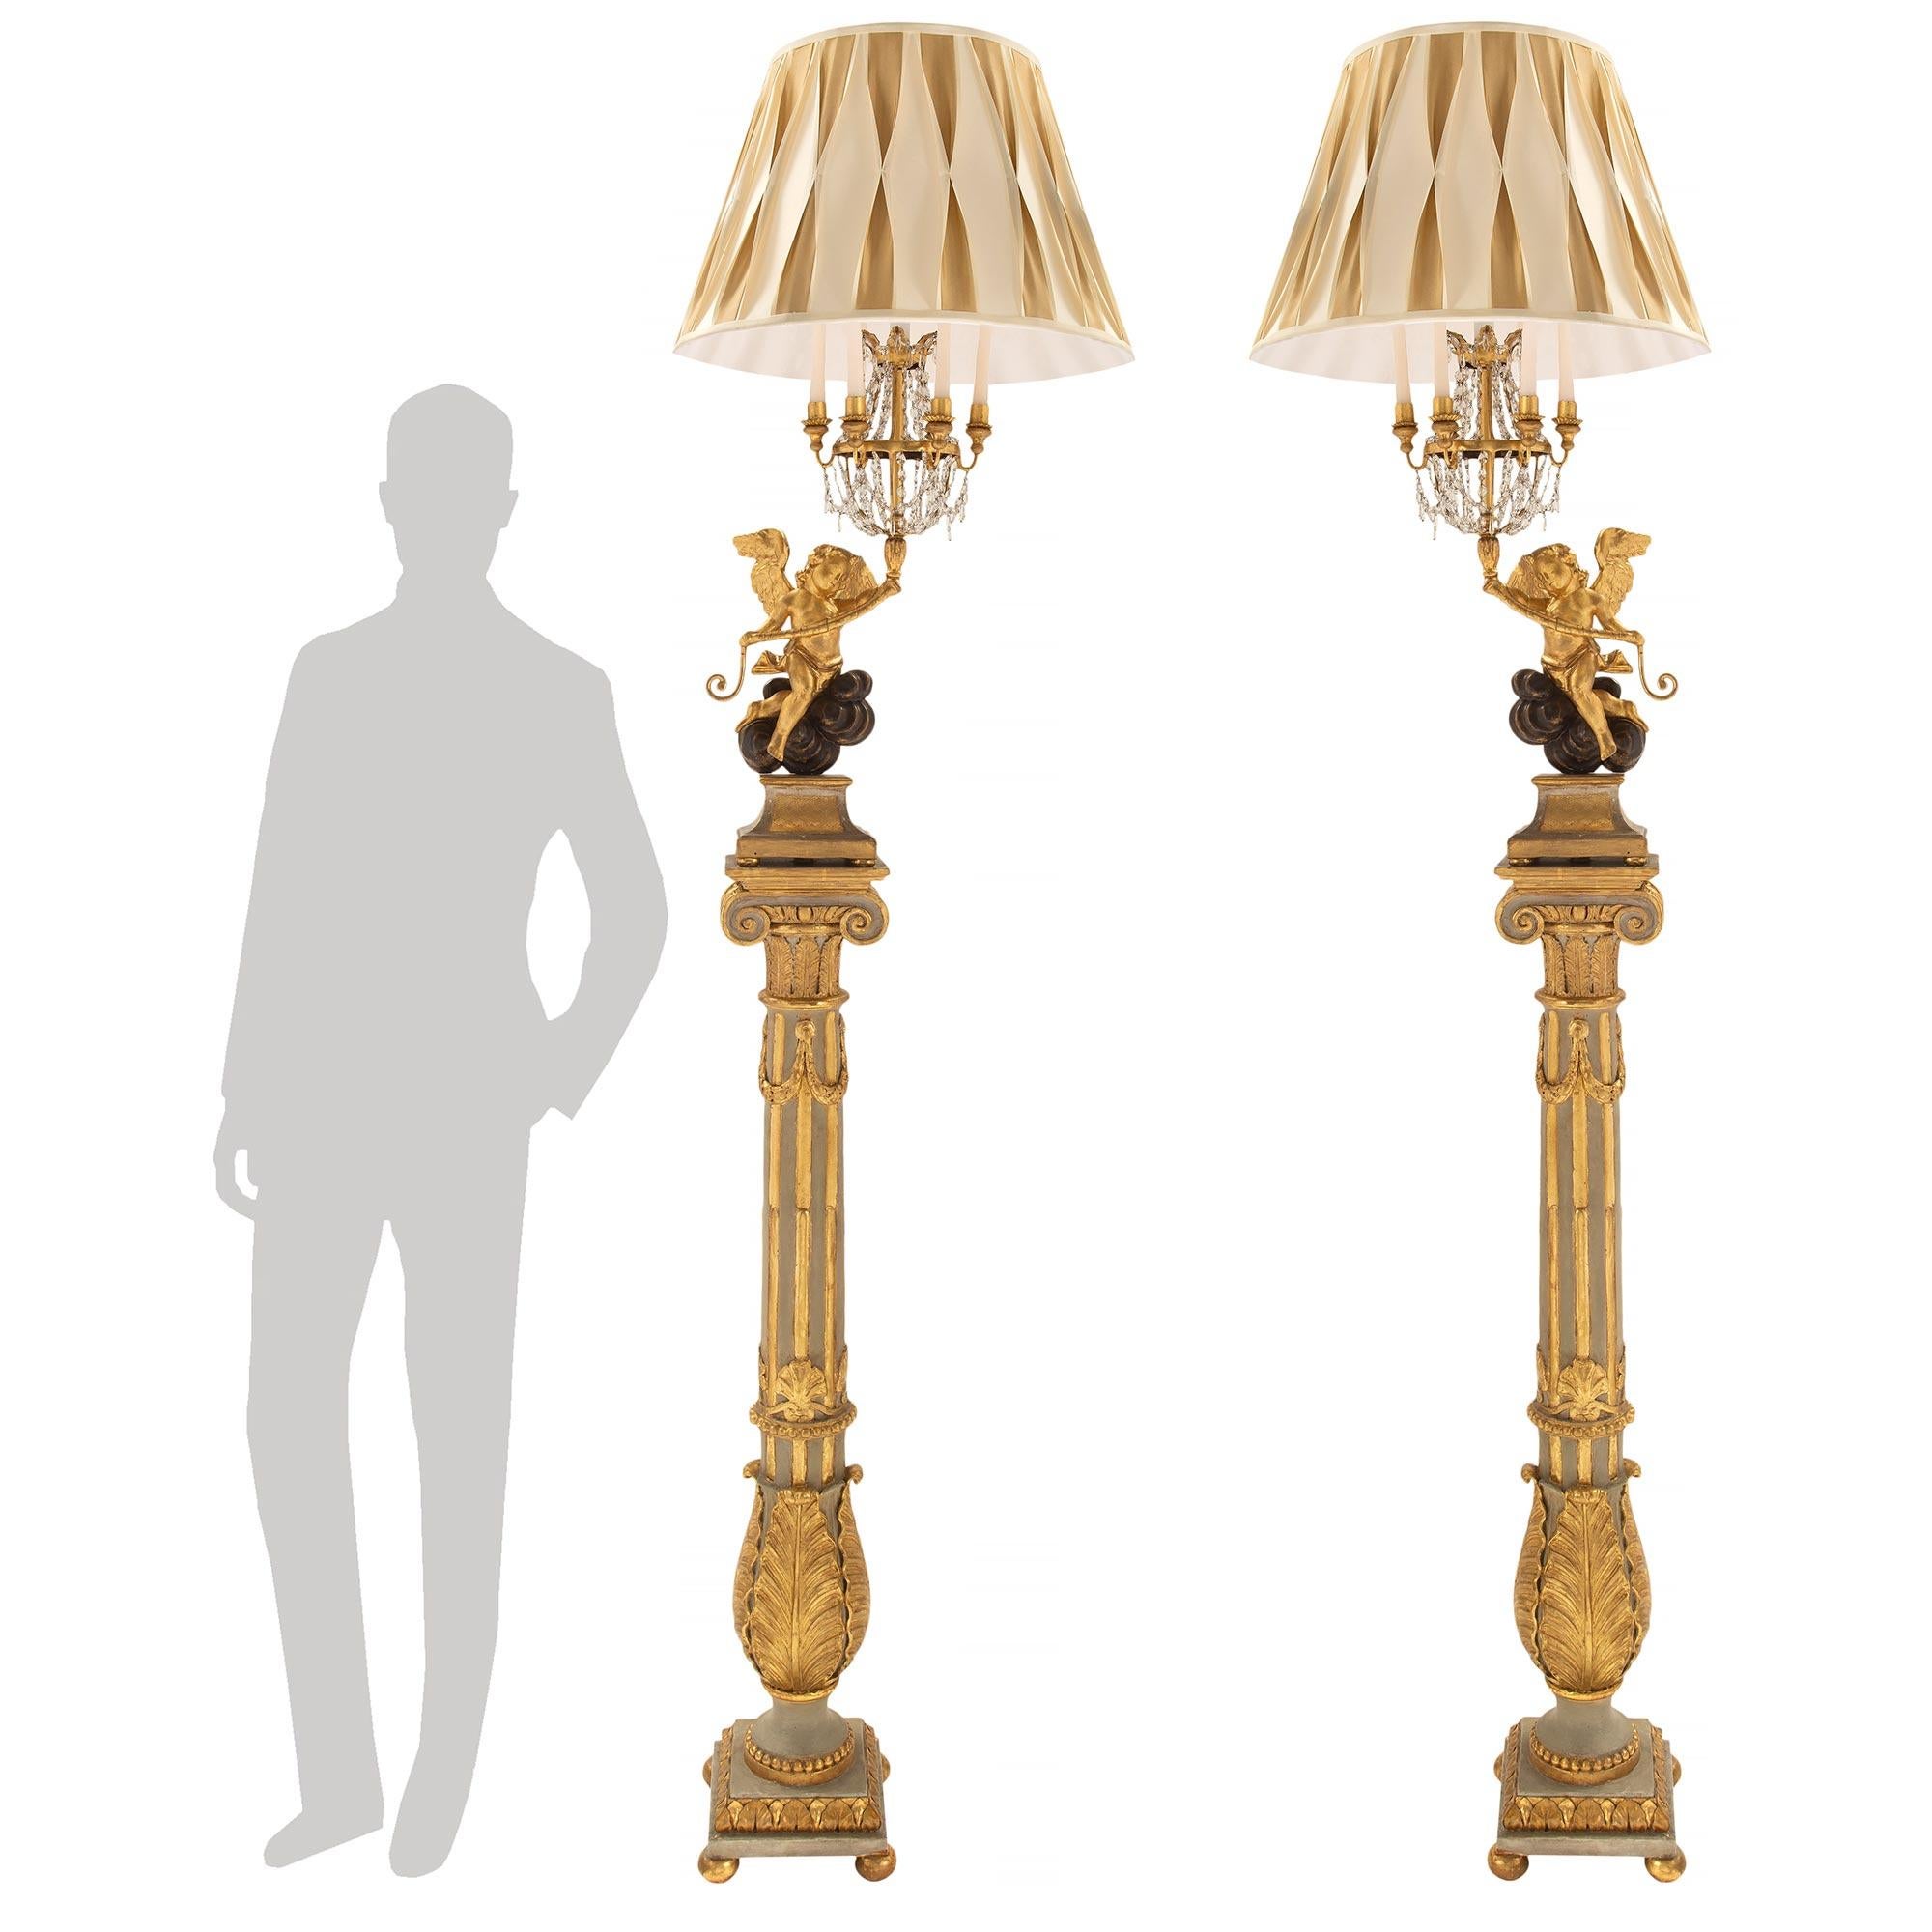 True Pair of Italian Early 19th Century Louis XVI Style Giltwood Floor Lamps For Sale 6